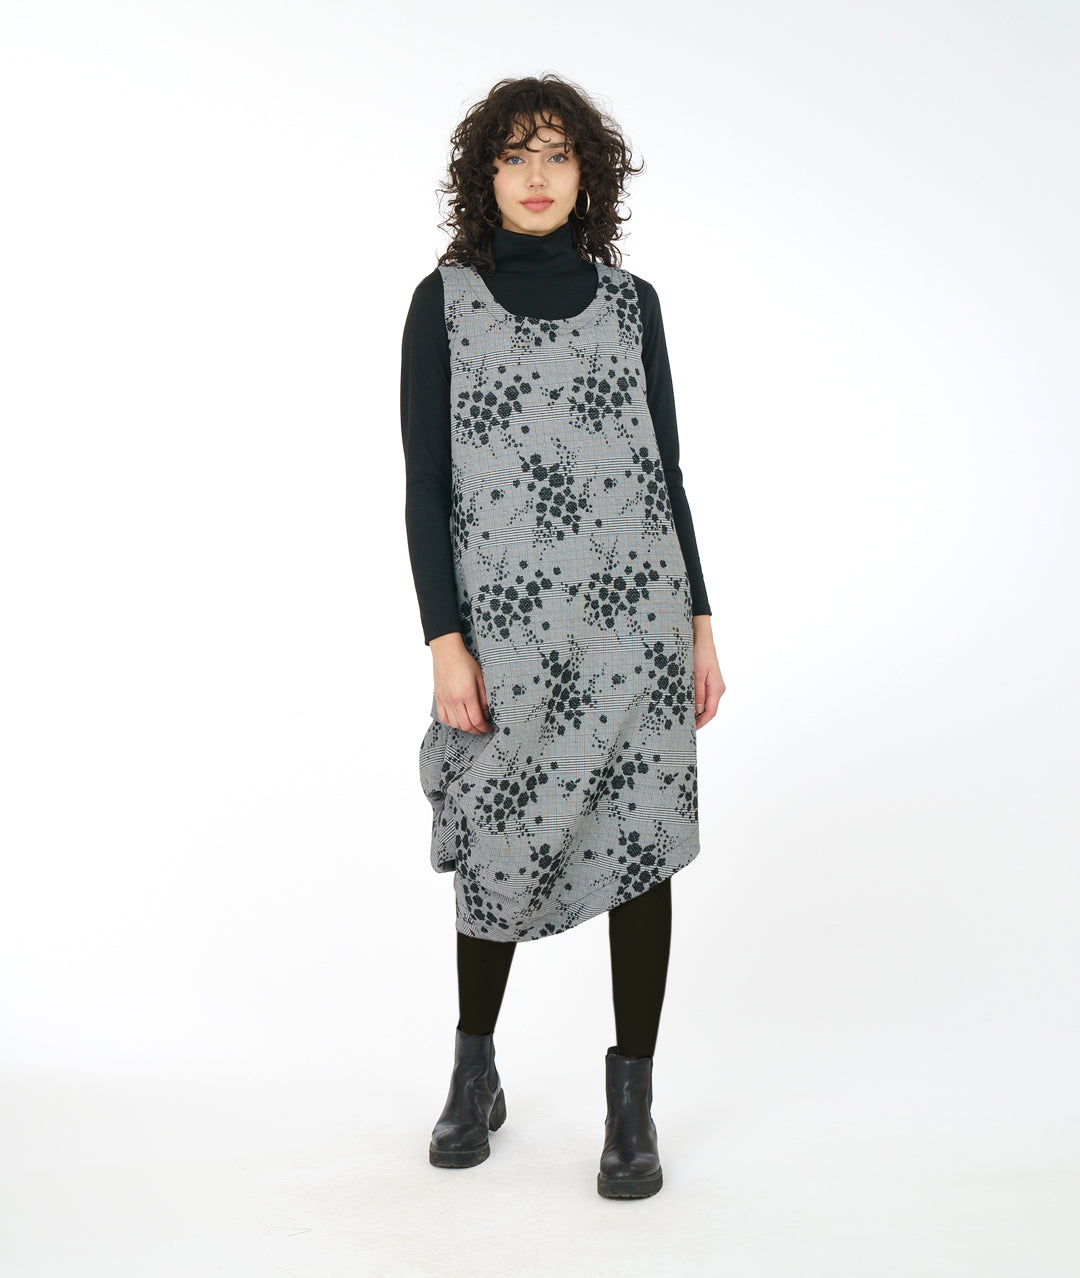 model in a grey plaid asymmetrical jumper dress with a black pollen print, worn over a black turtleneck, leggings and booties